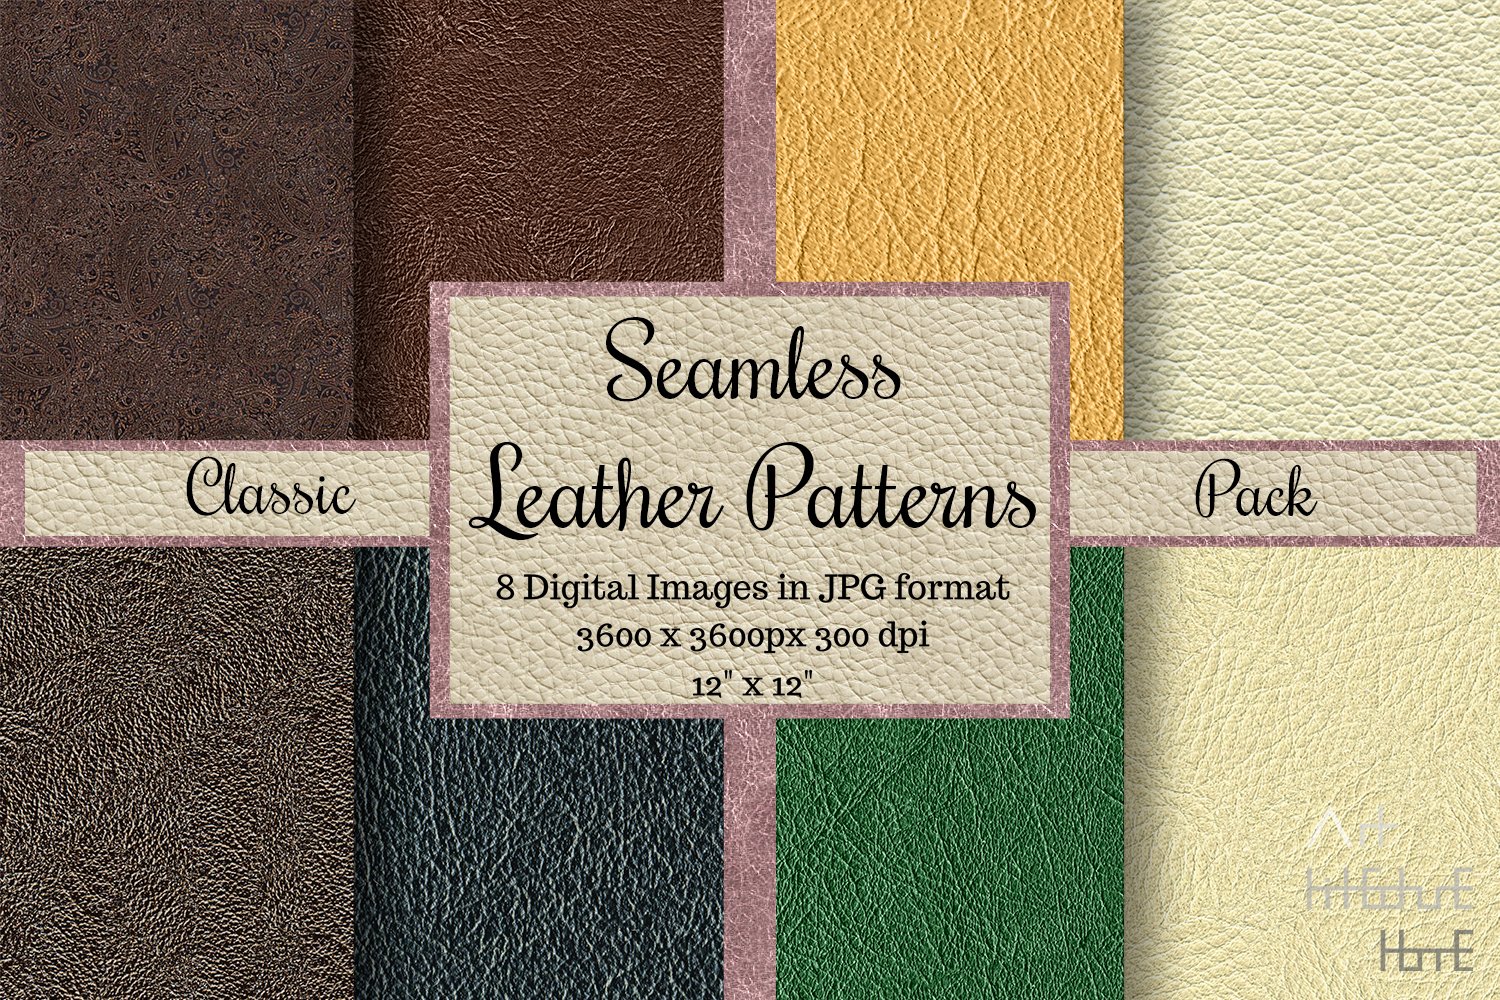 Seamless Leather Patterns - Classic cover image.